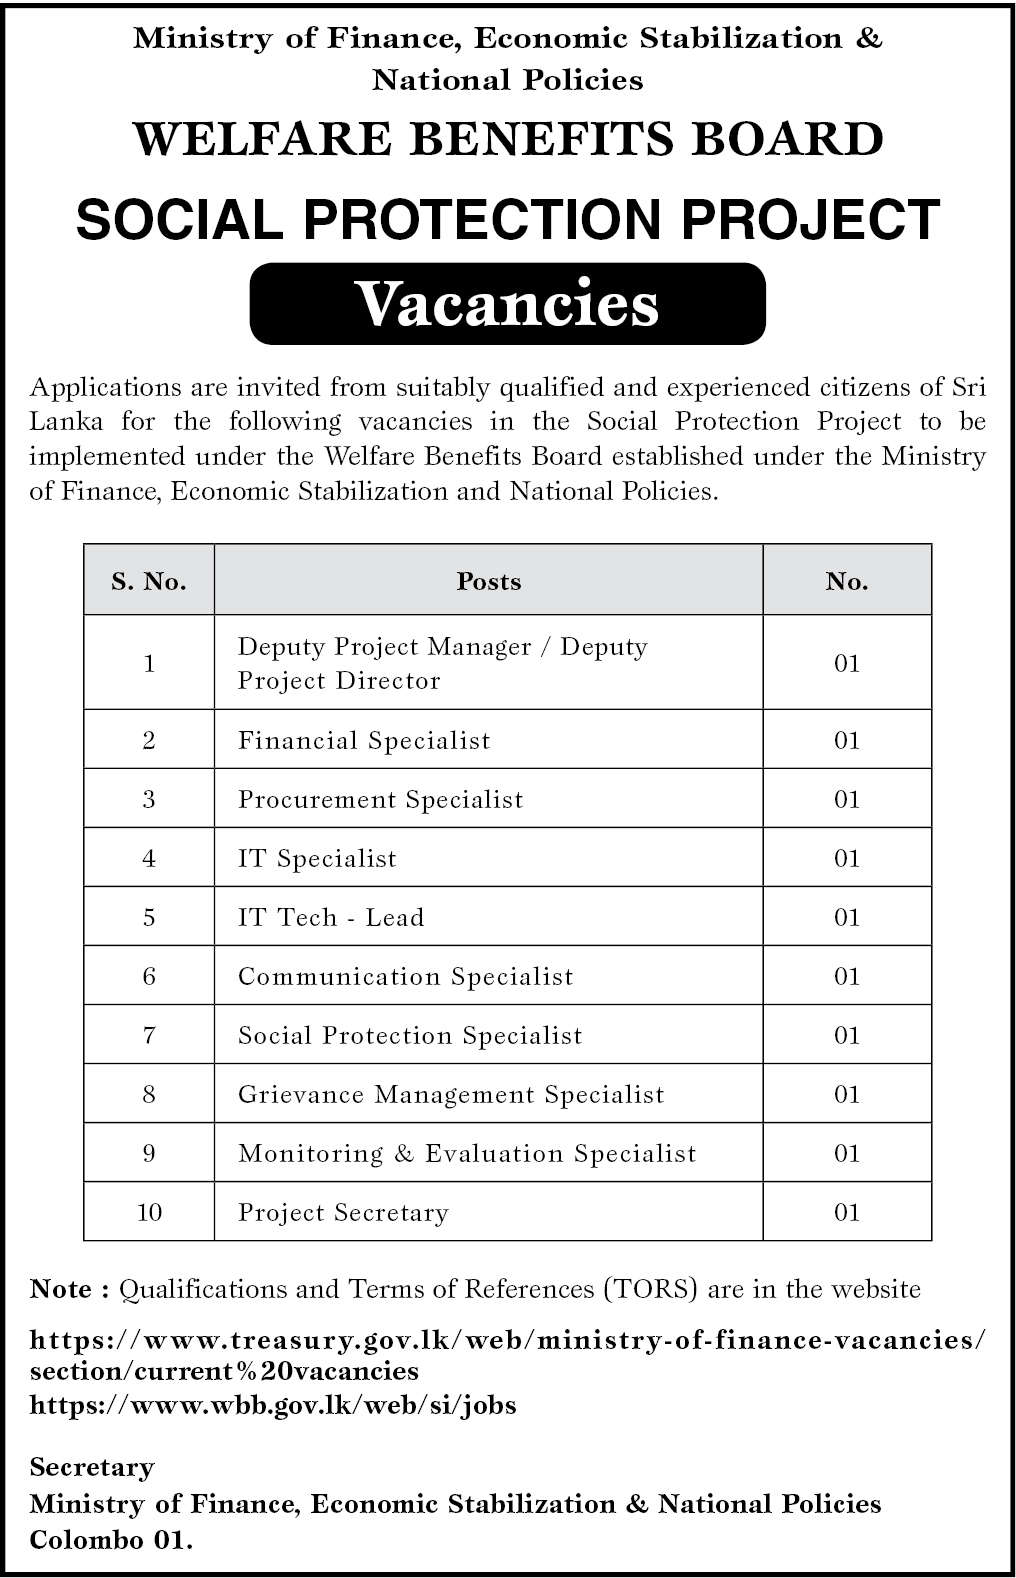 Deputy project manager, Financial Specialist, Procumbent Specialist, IT Specialist, IT Tech - Lead, Communication specialist, Social Protection specialist,  Grievance Management Specialist, Monitoring and evaluation Specialist, Project Secretory